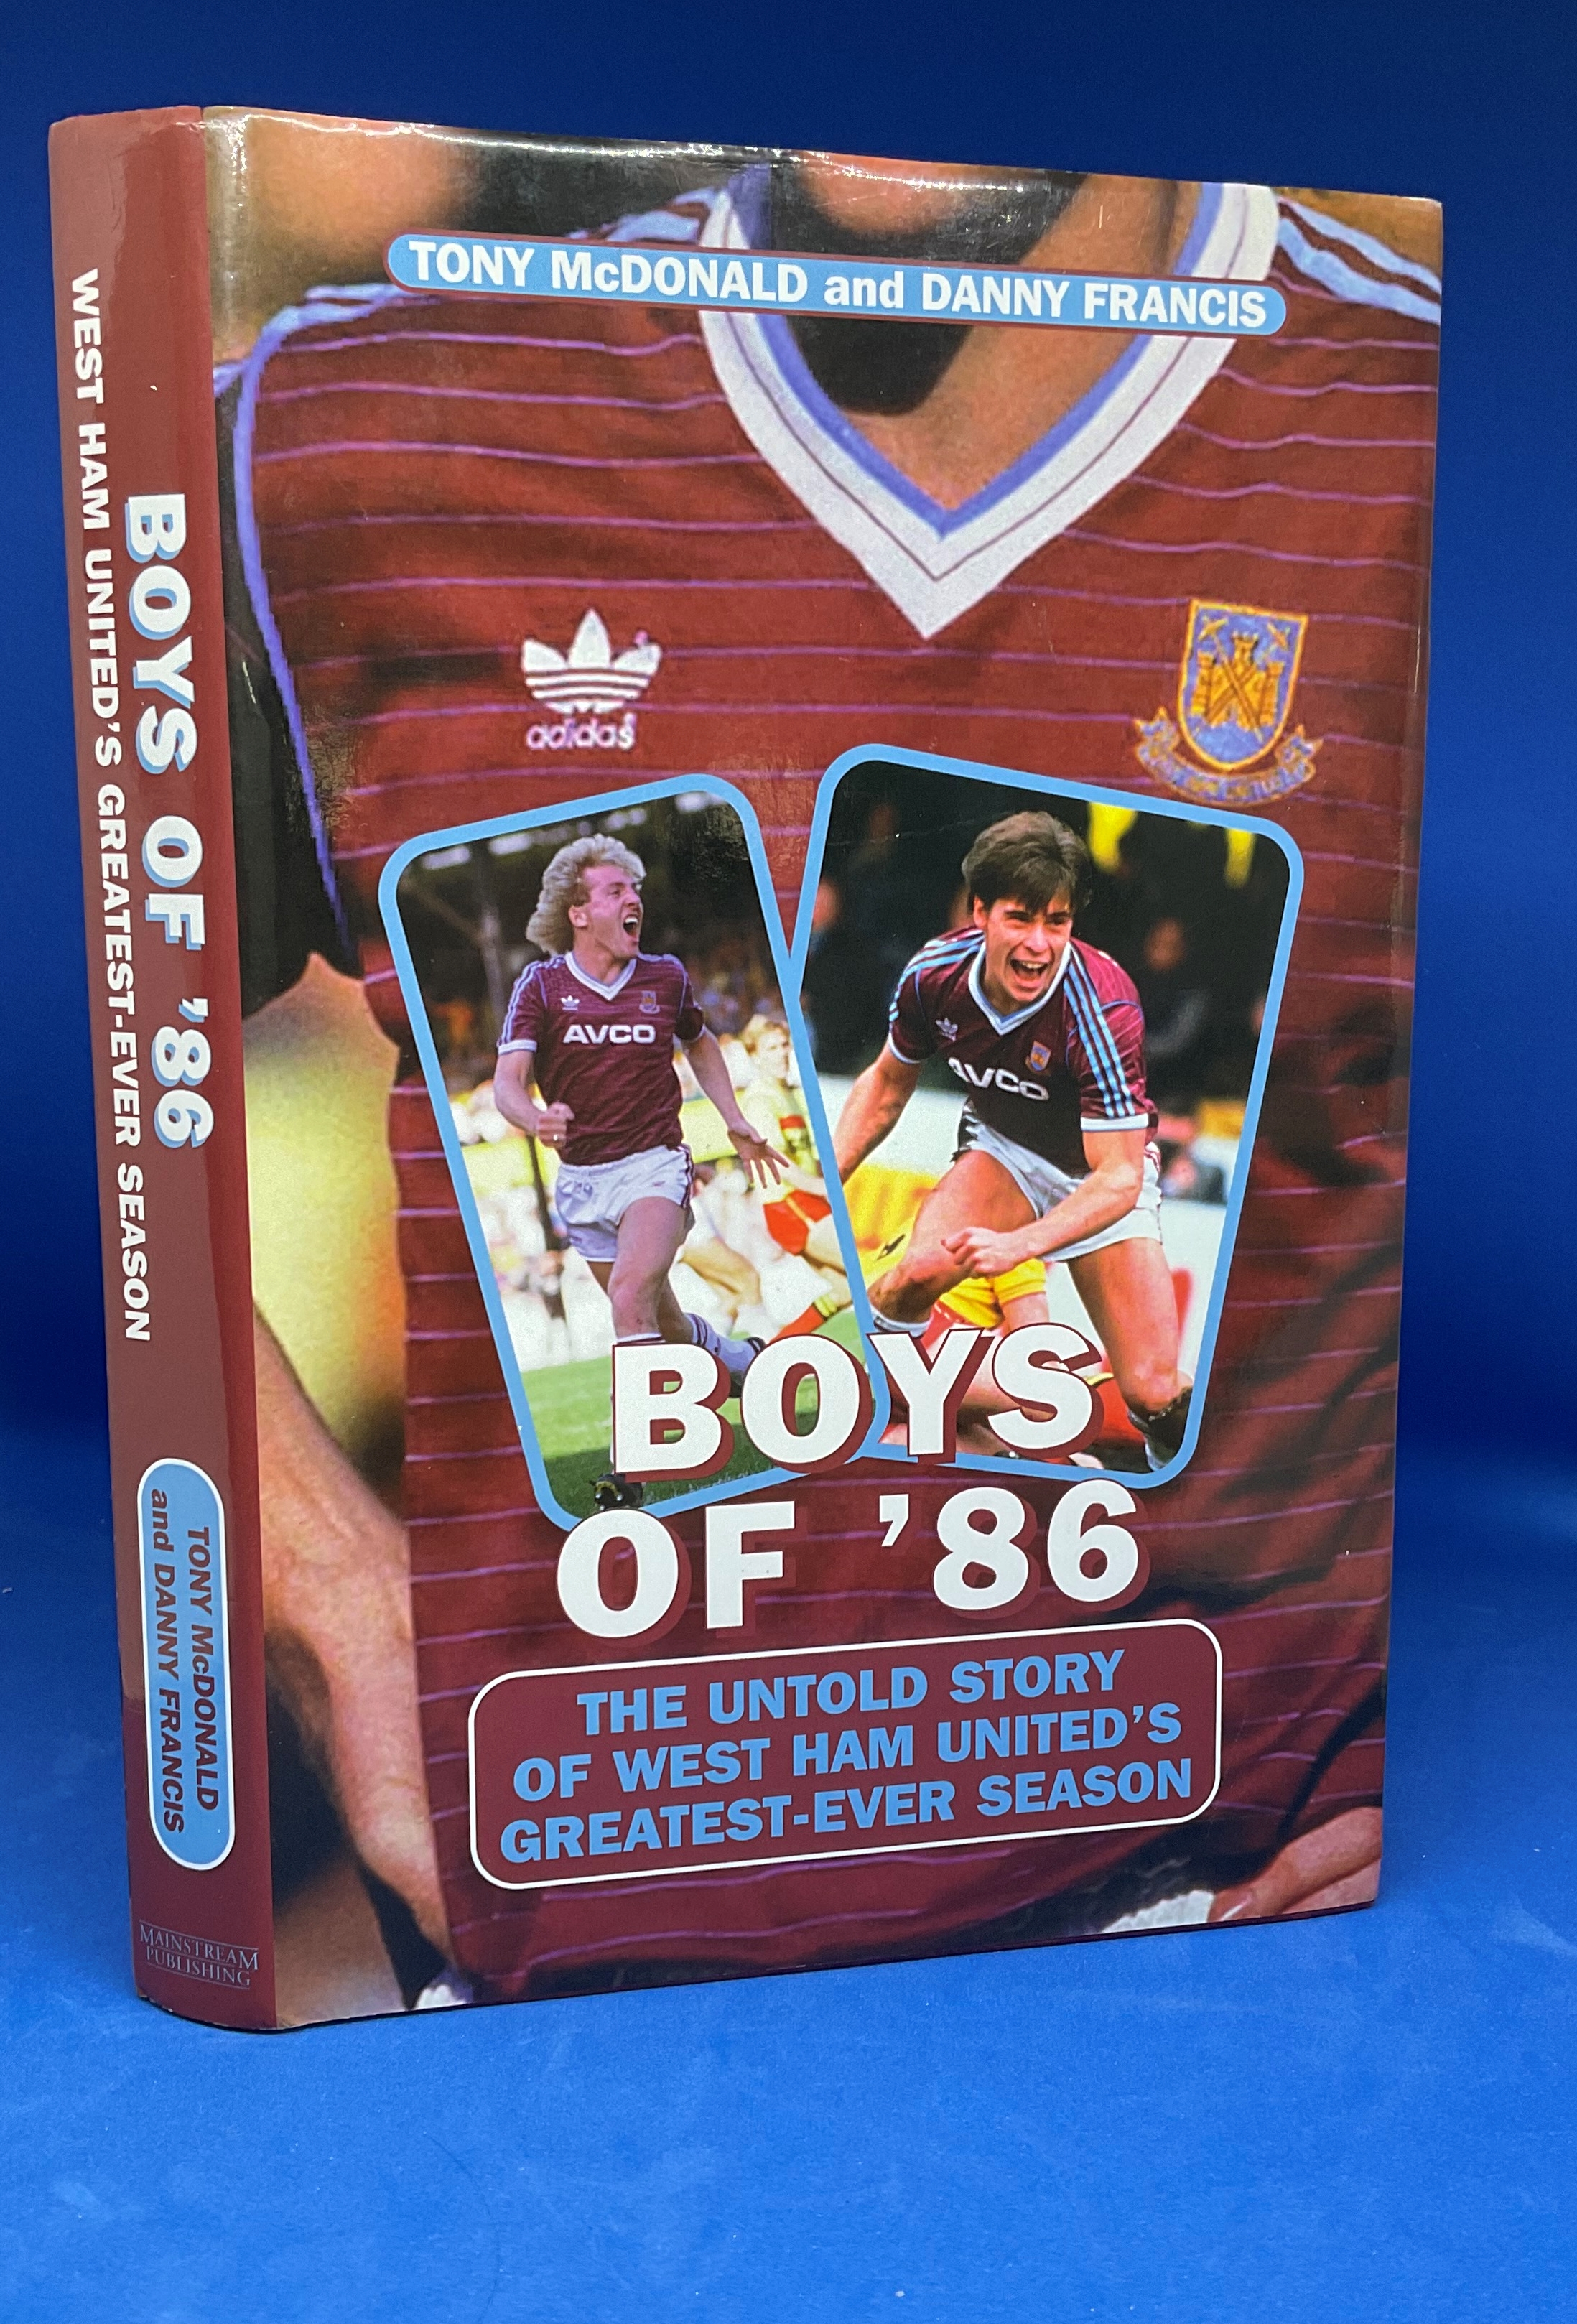 First Edition Boys of '86 The Untold Story of West Ham United's Greatest Ever Season by Tony